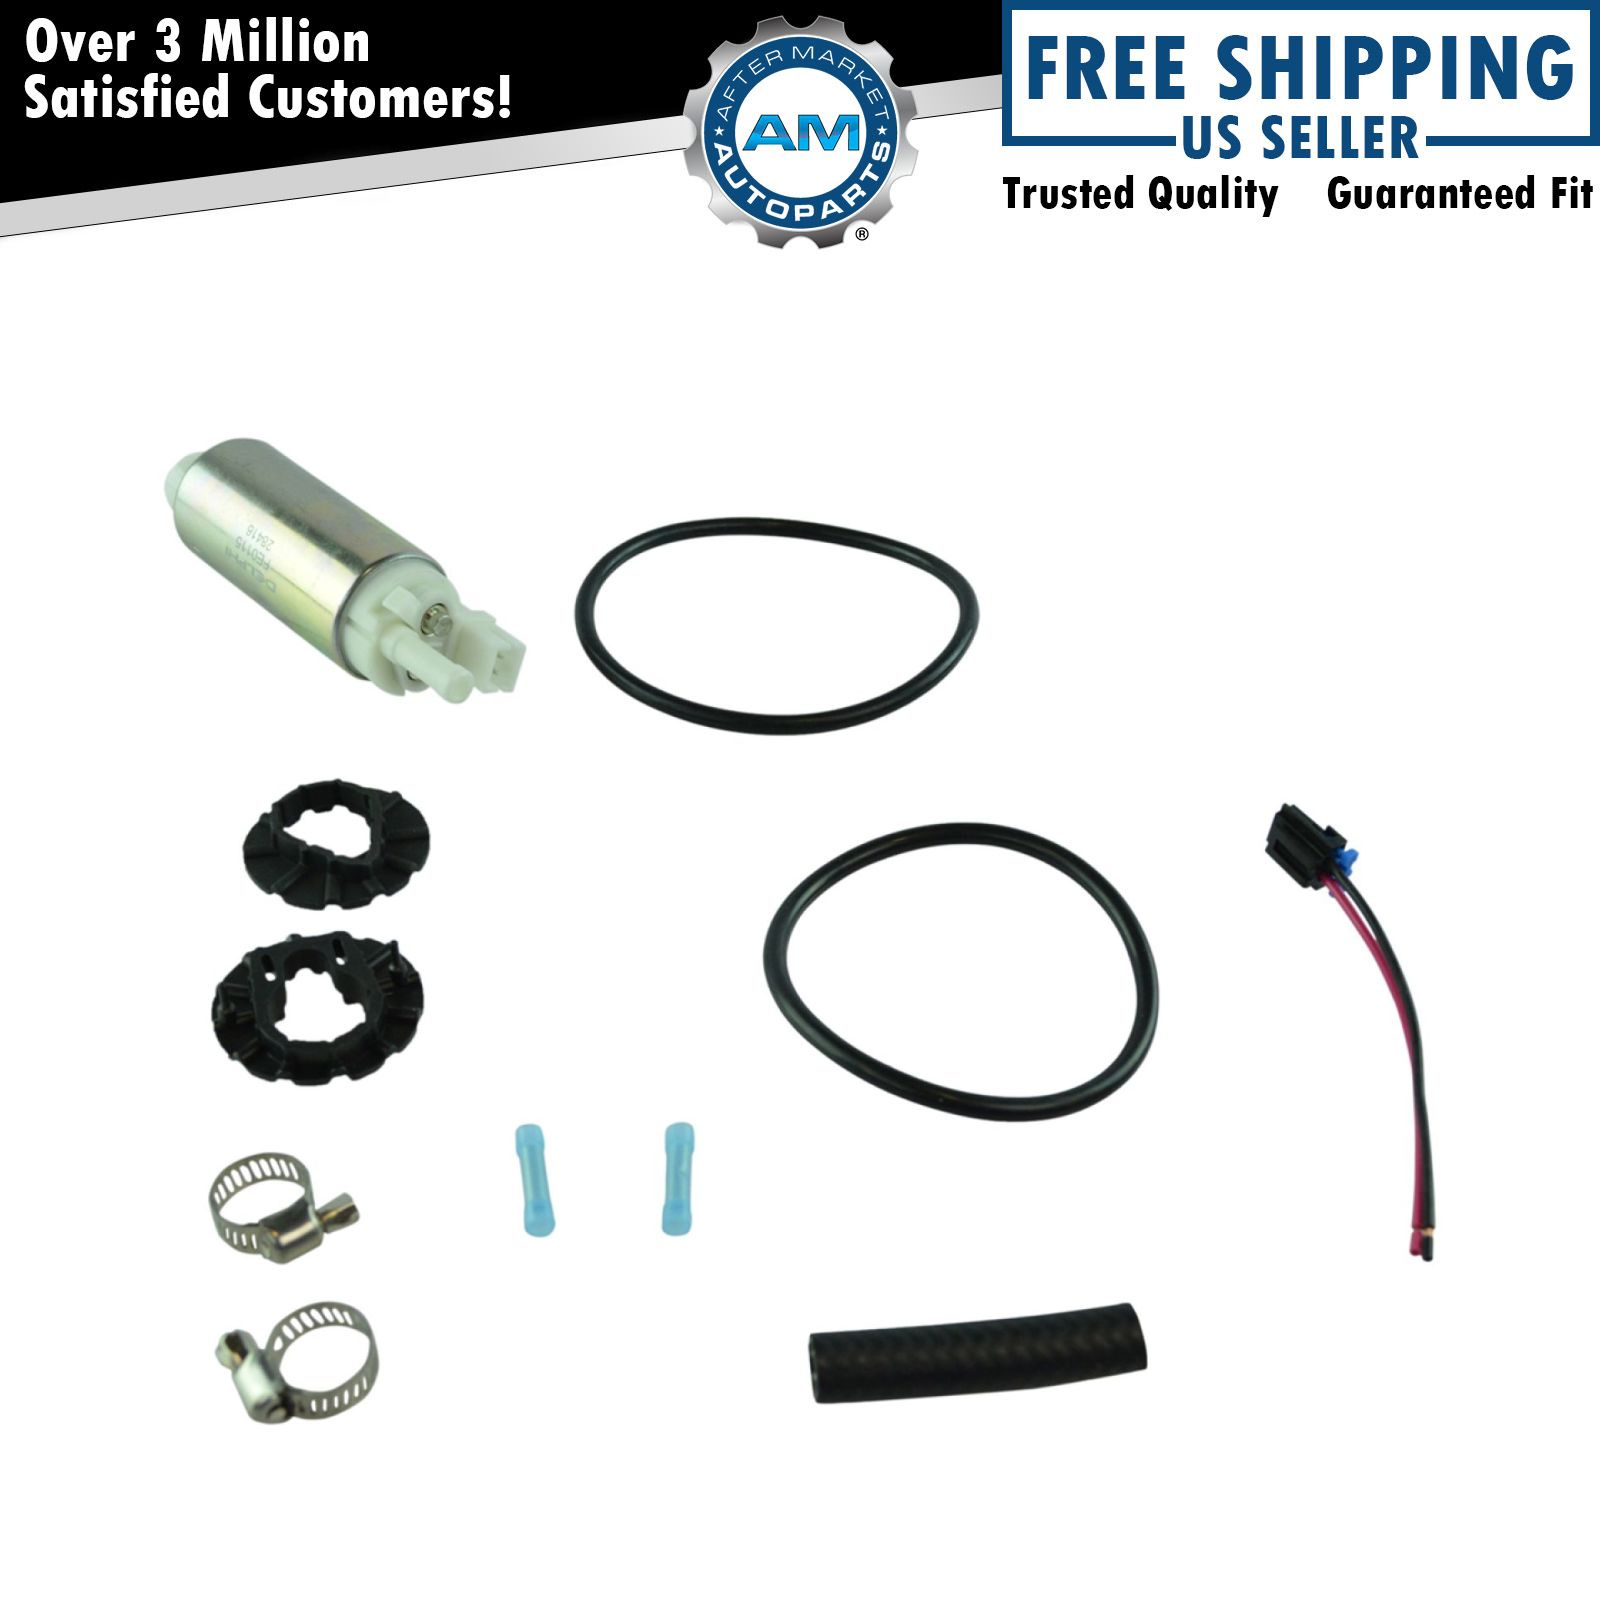 Delphi FE0115 Electric Fuel Pump for Buick Chevy GMC Olds Pontiac Brand New